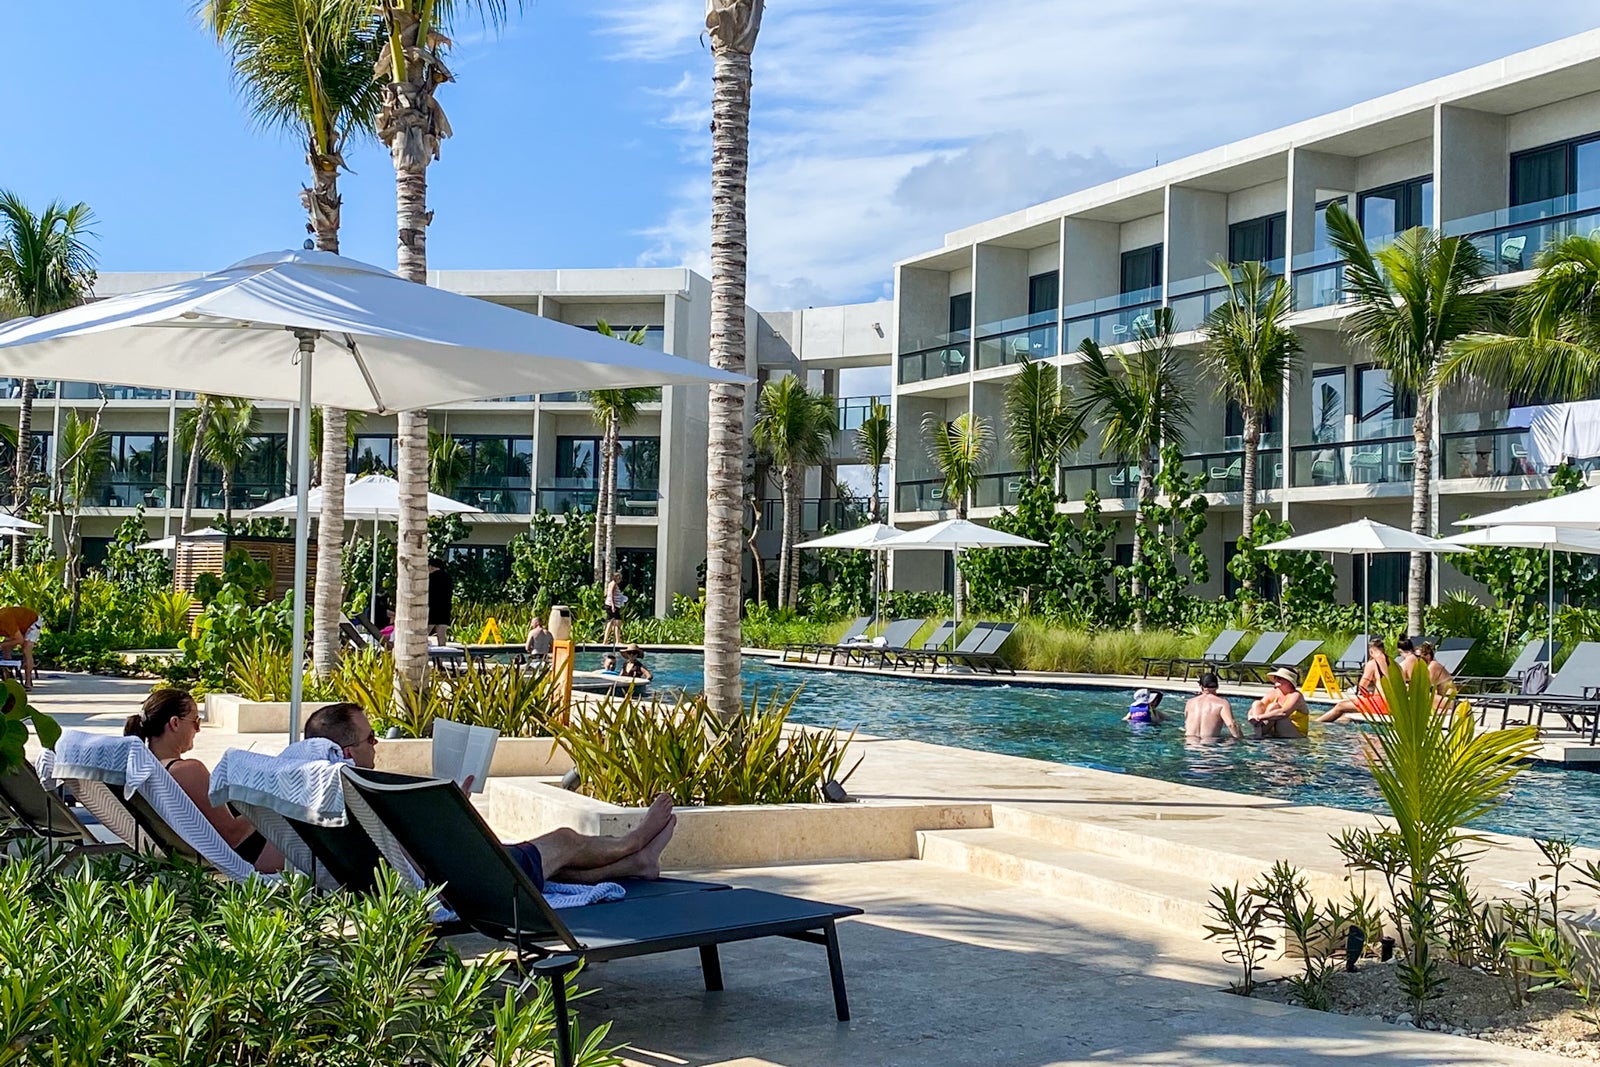 Affordable fun that’s great for families: My stay at Hilton’s 1st all-inclusive resort in Tulum